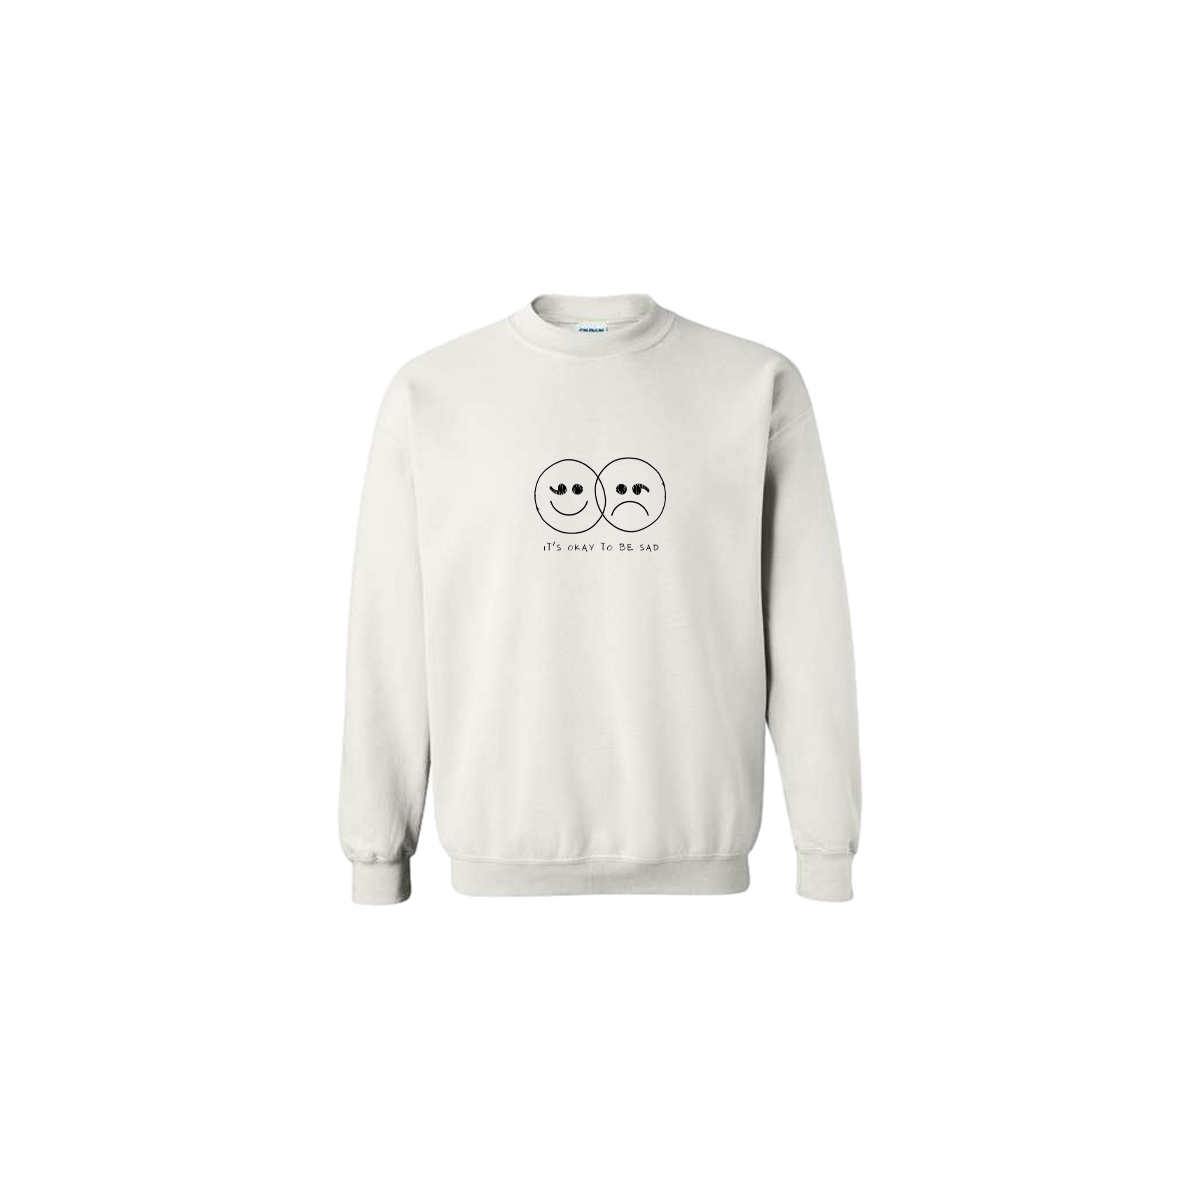 It's Okay to be Sad Double Smiley Face Embroidered White Crewneck - Mental Health Awareness Clothing